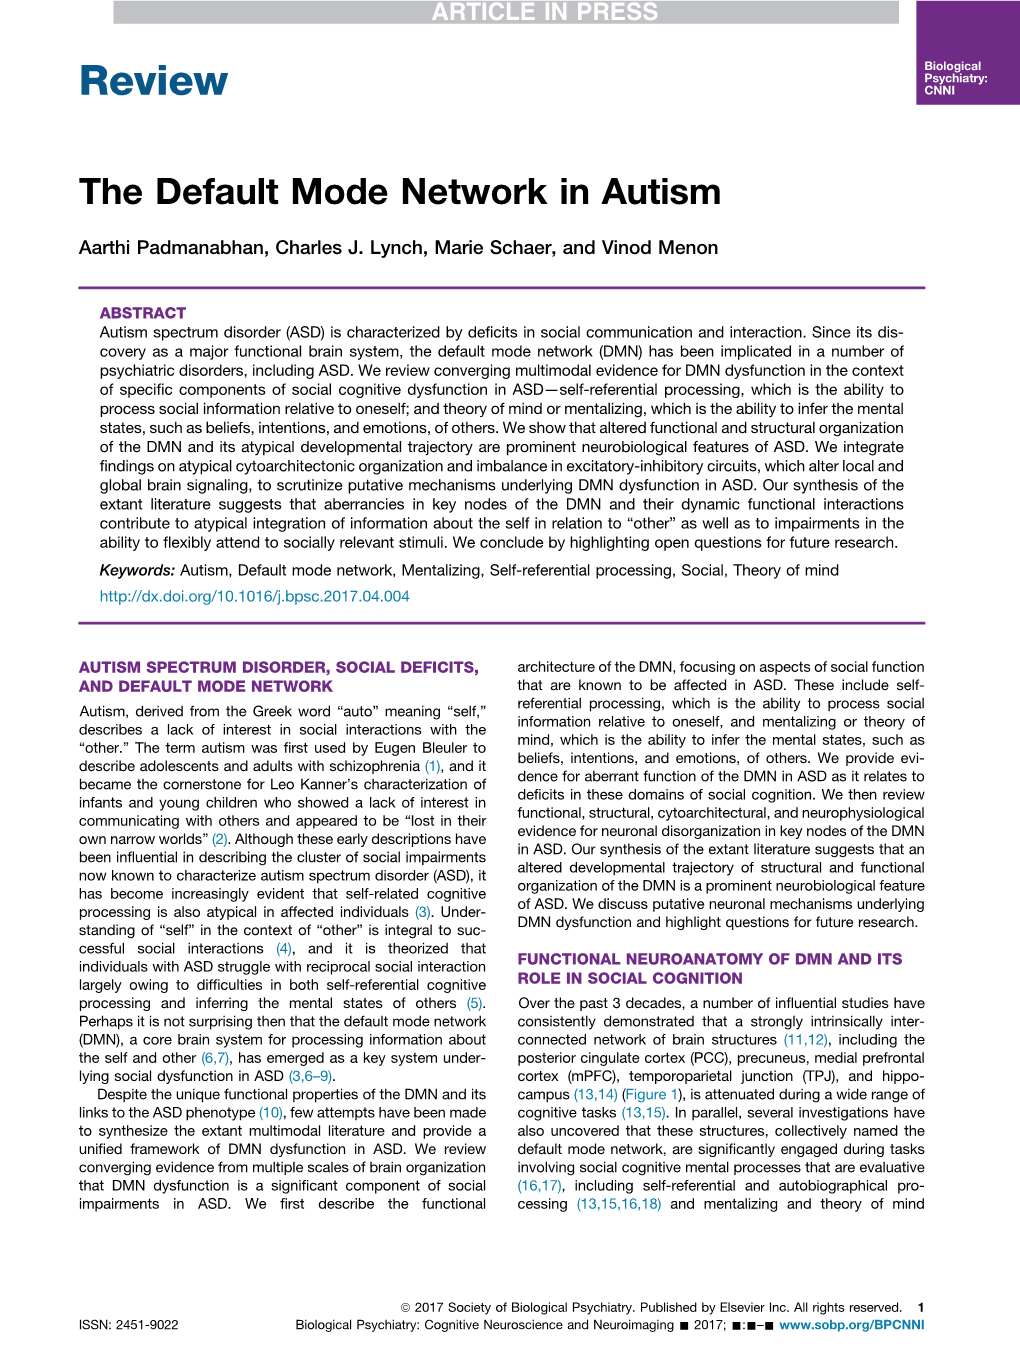 The Default Mode Network in Autism Read More